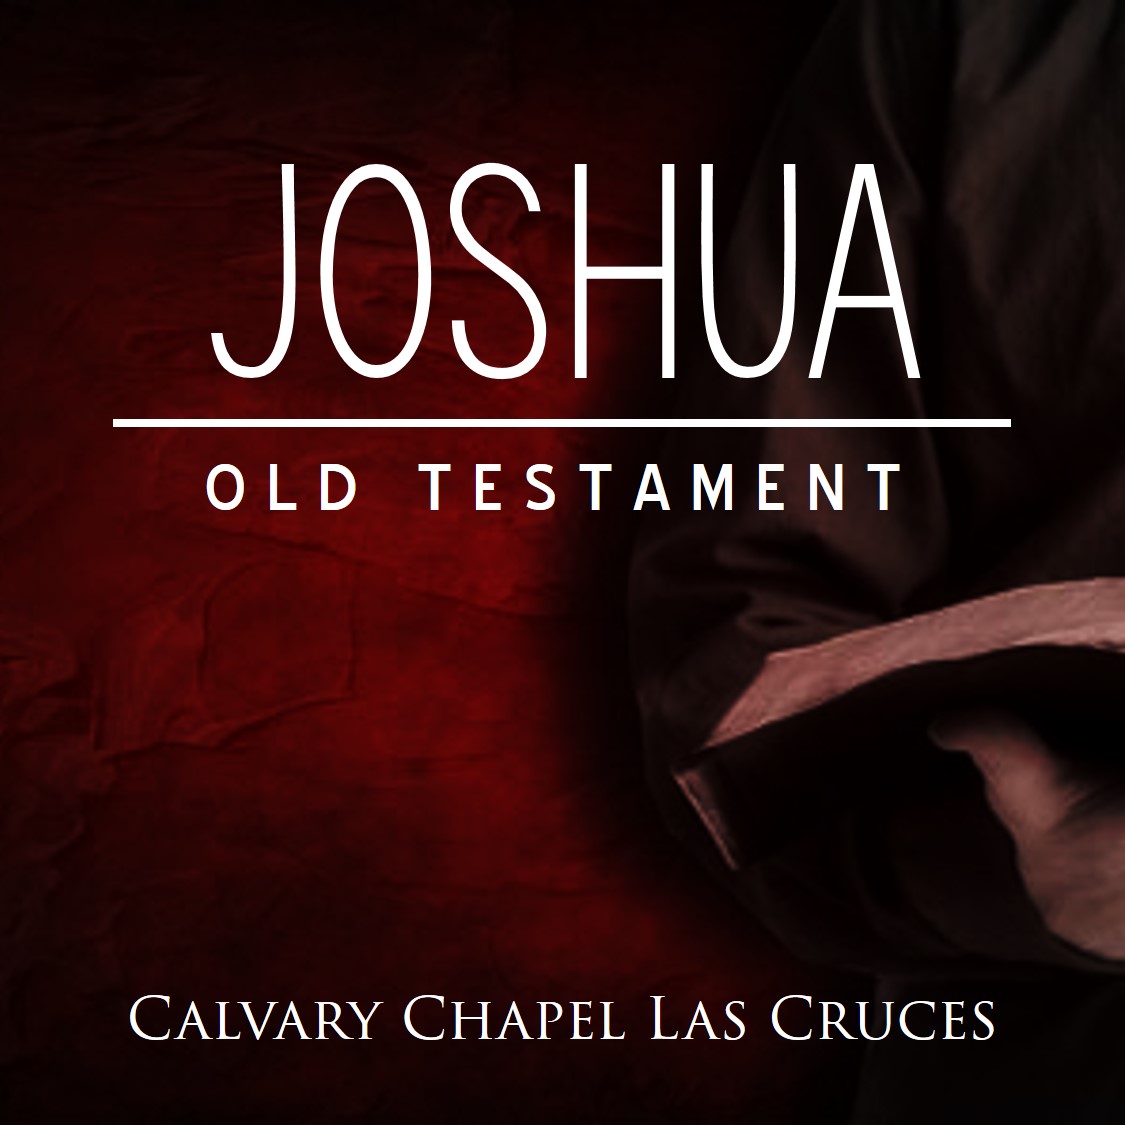 Joshua 2 & 3 - ”Rahab, The Spies, and The Crossing of the Jordan”